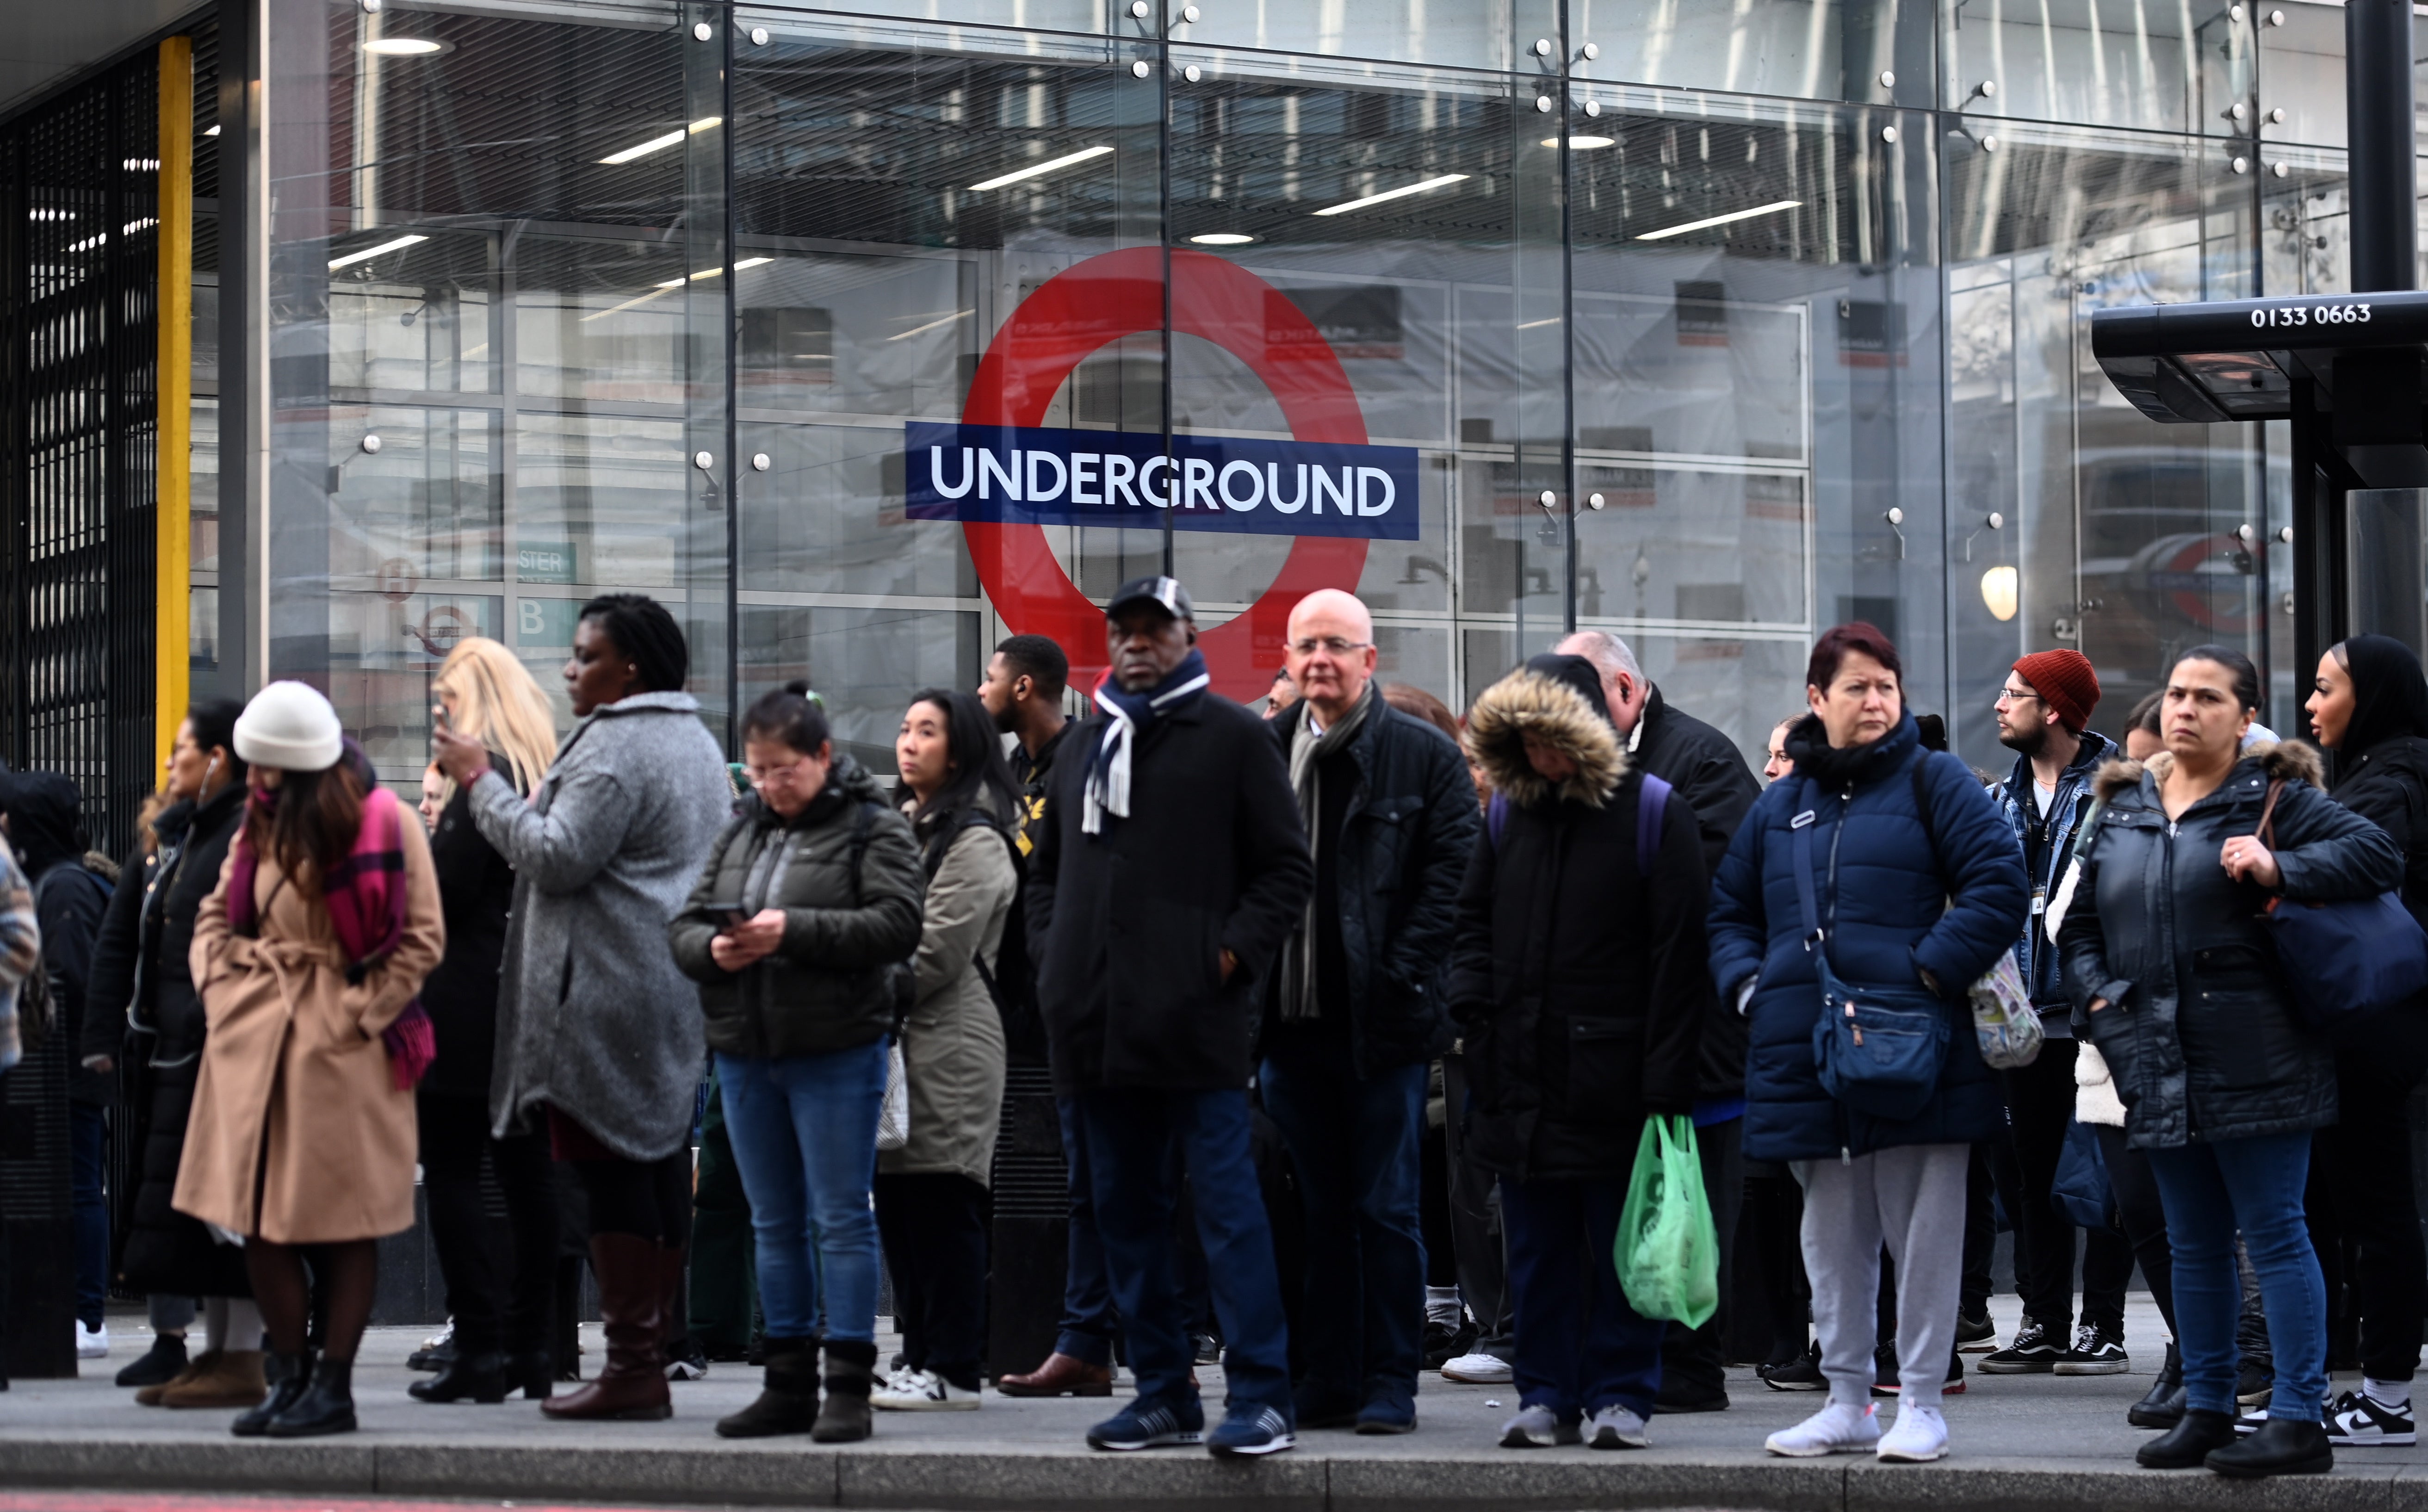 Tube strike latest London brought to a standstill as TfL workers